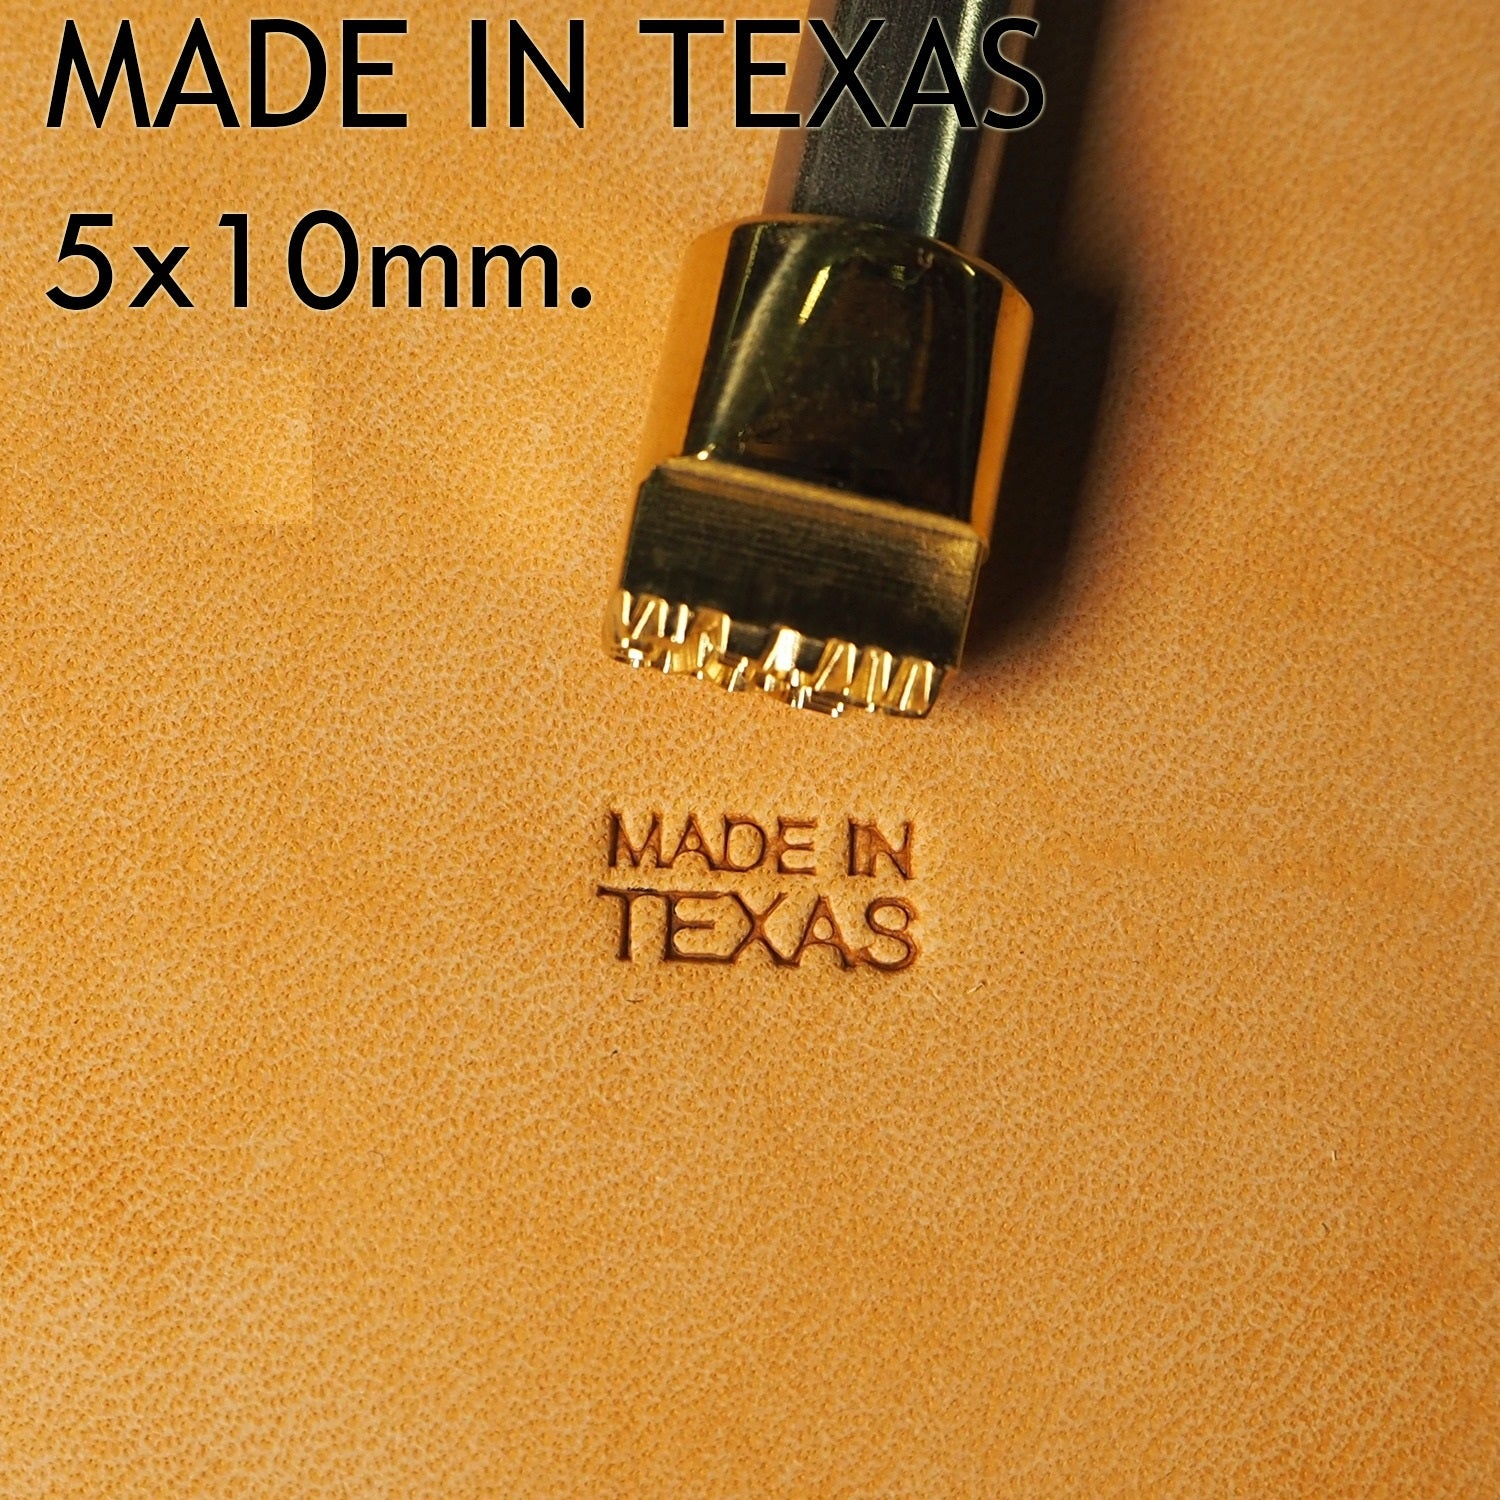 #Made In Texas - Leather Crafting Stamp Tool